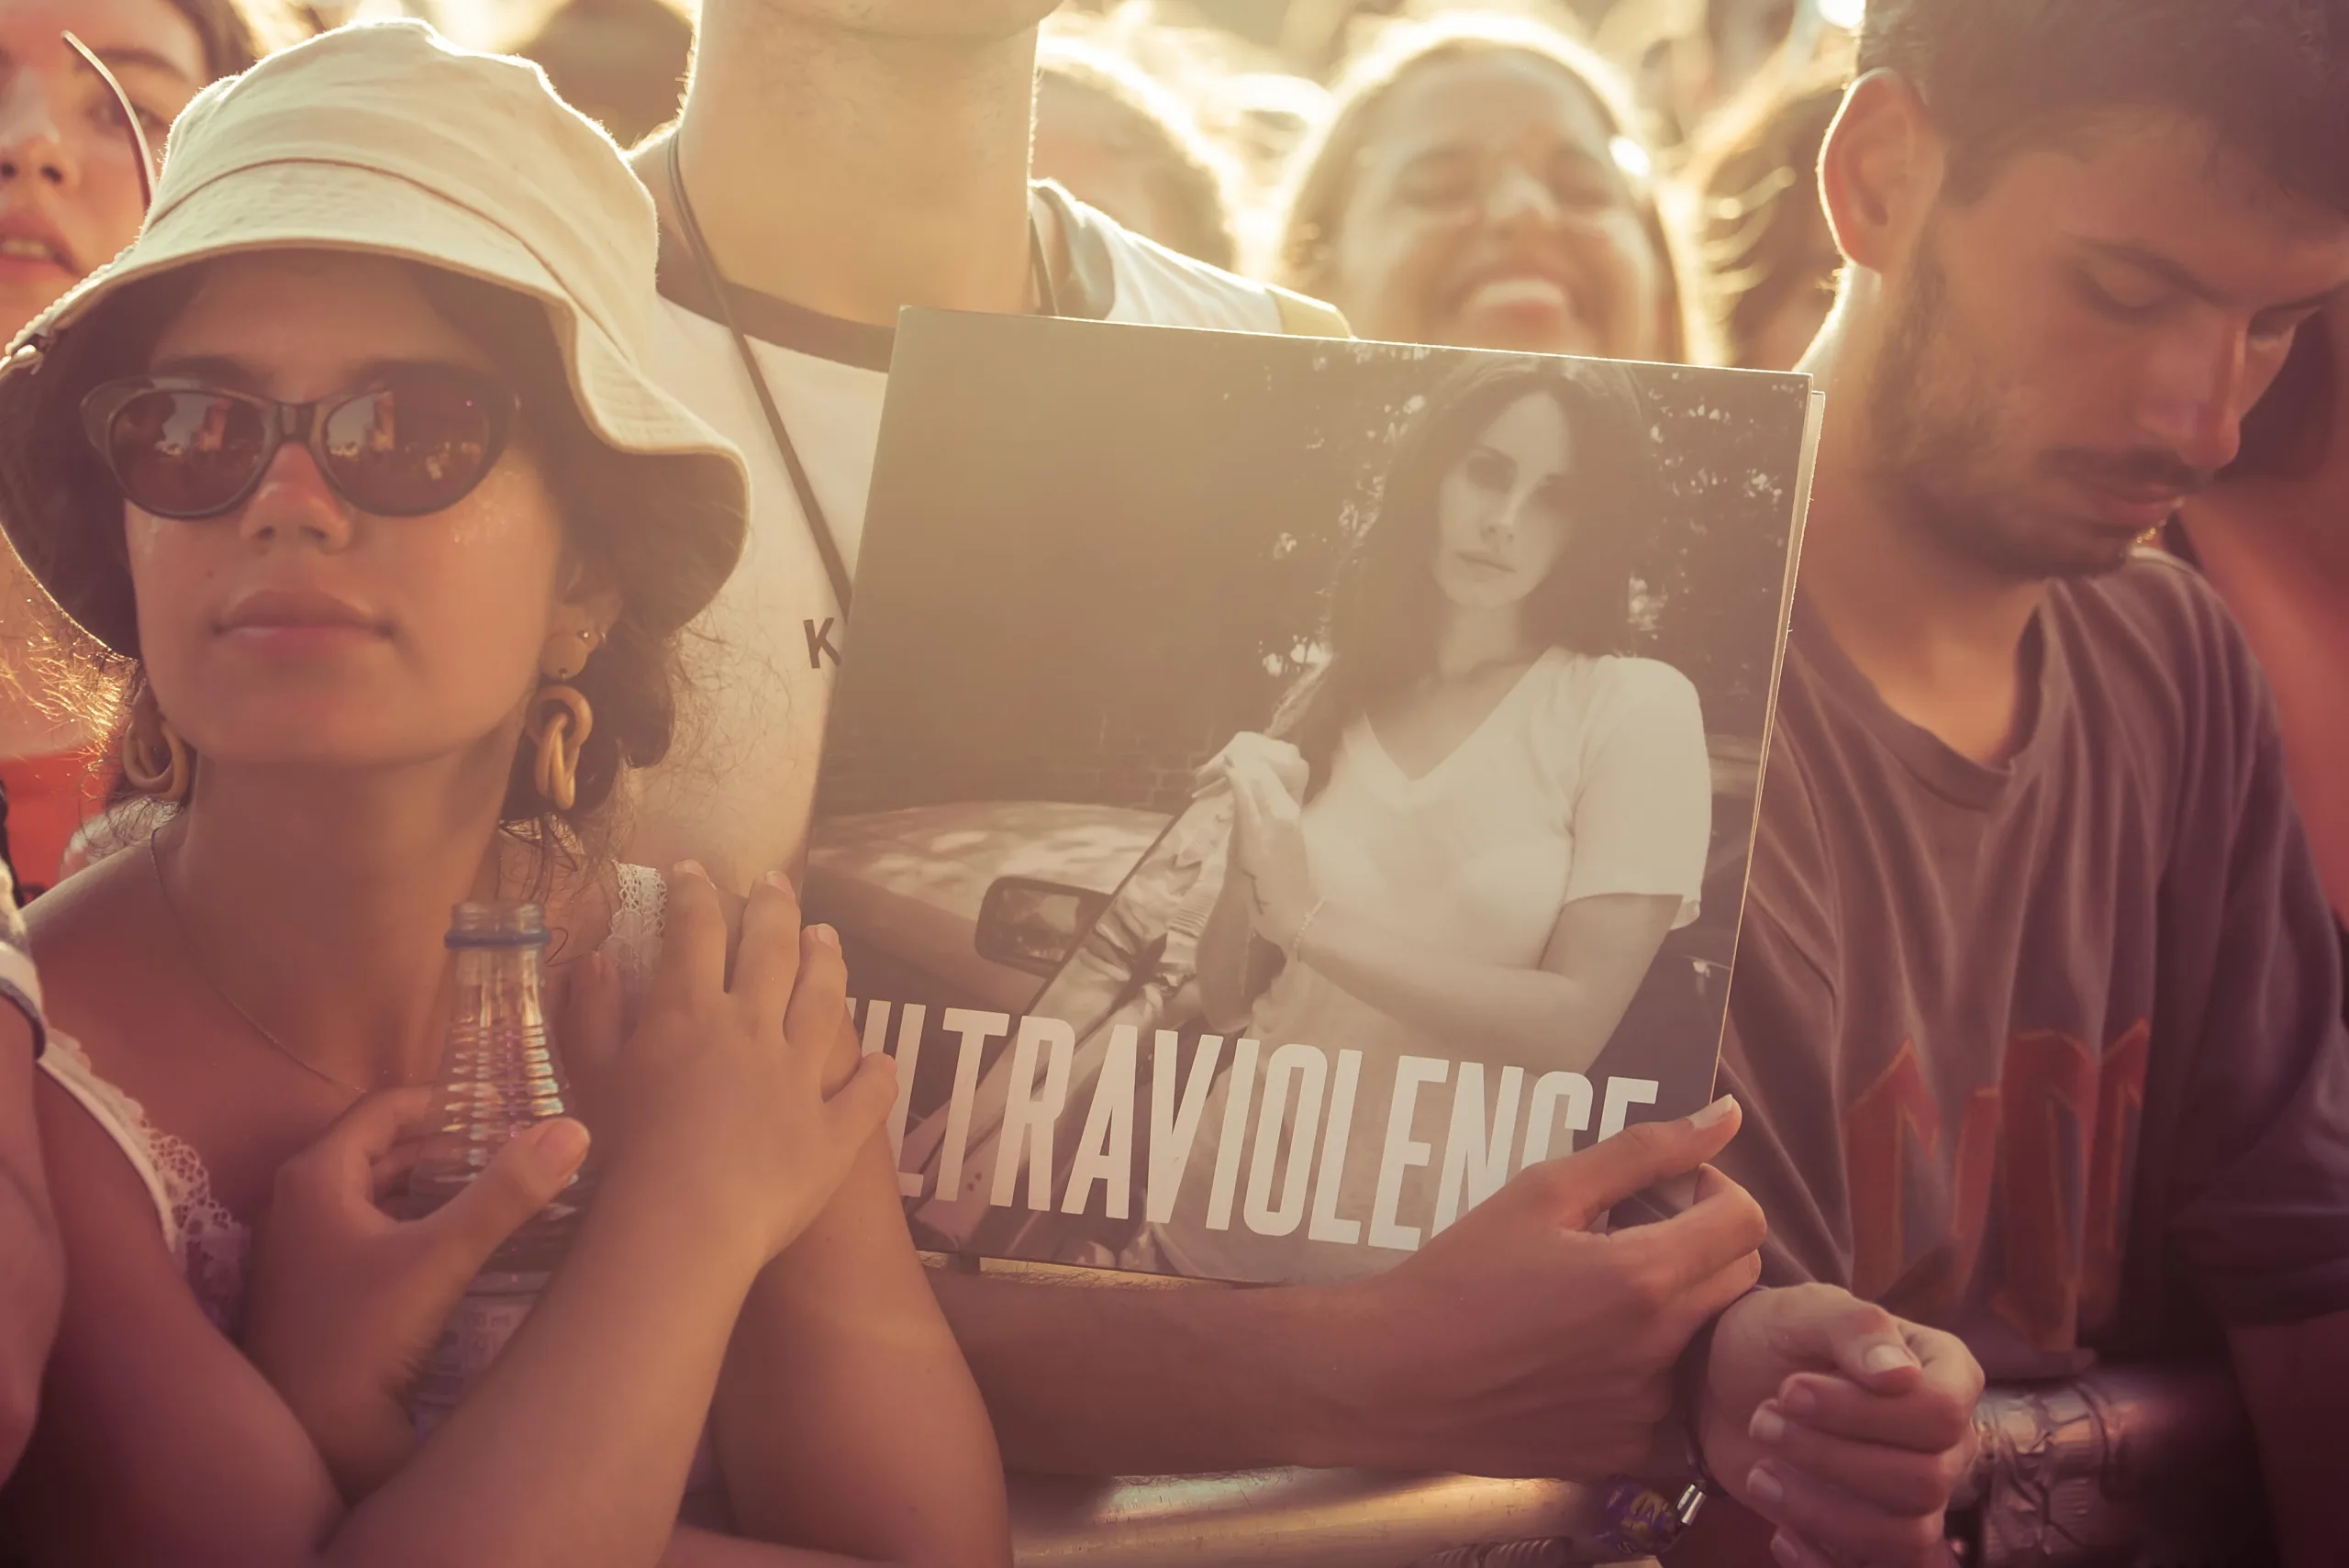 A photograph of someone holding up Lana Del Ray's album Ultraviolence next to a girl in sunglasses and a white bucket hat with the sun shining on them